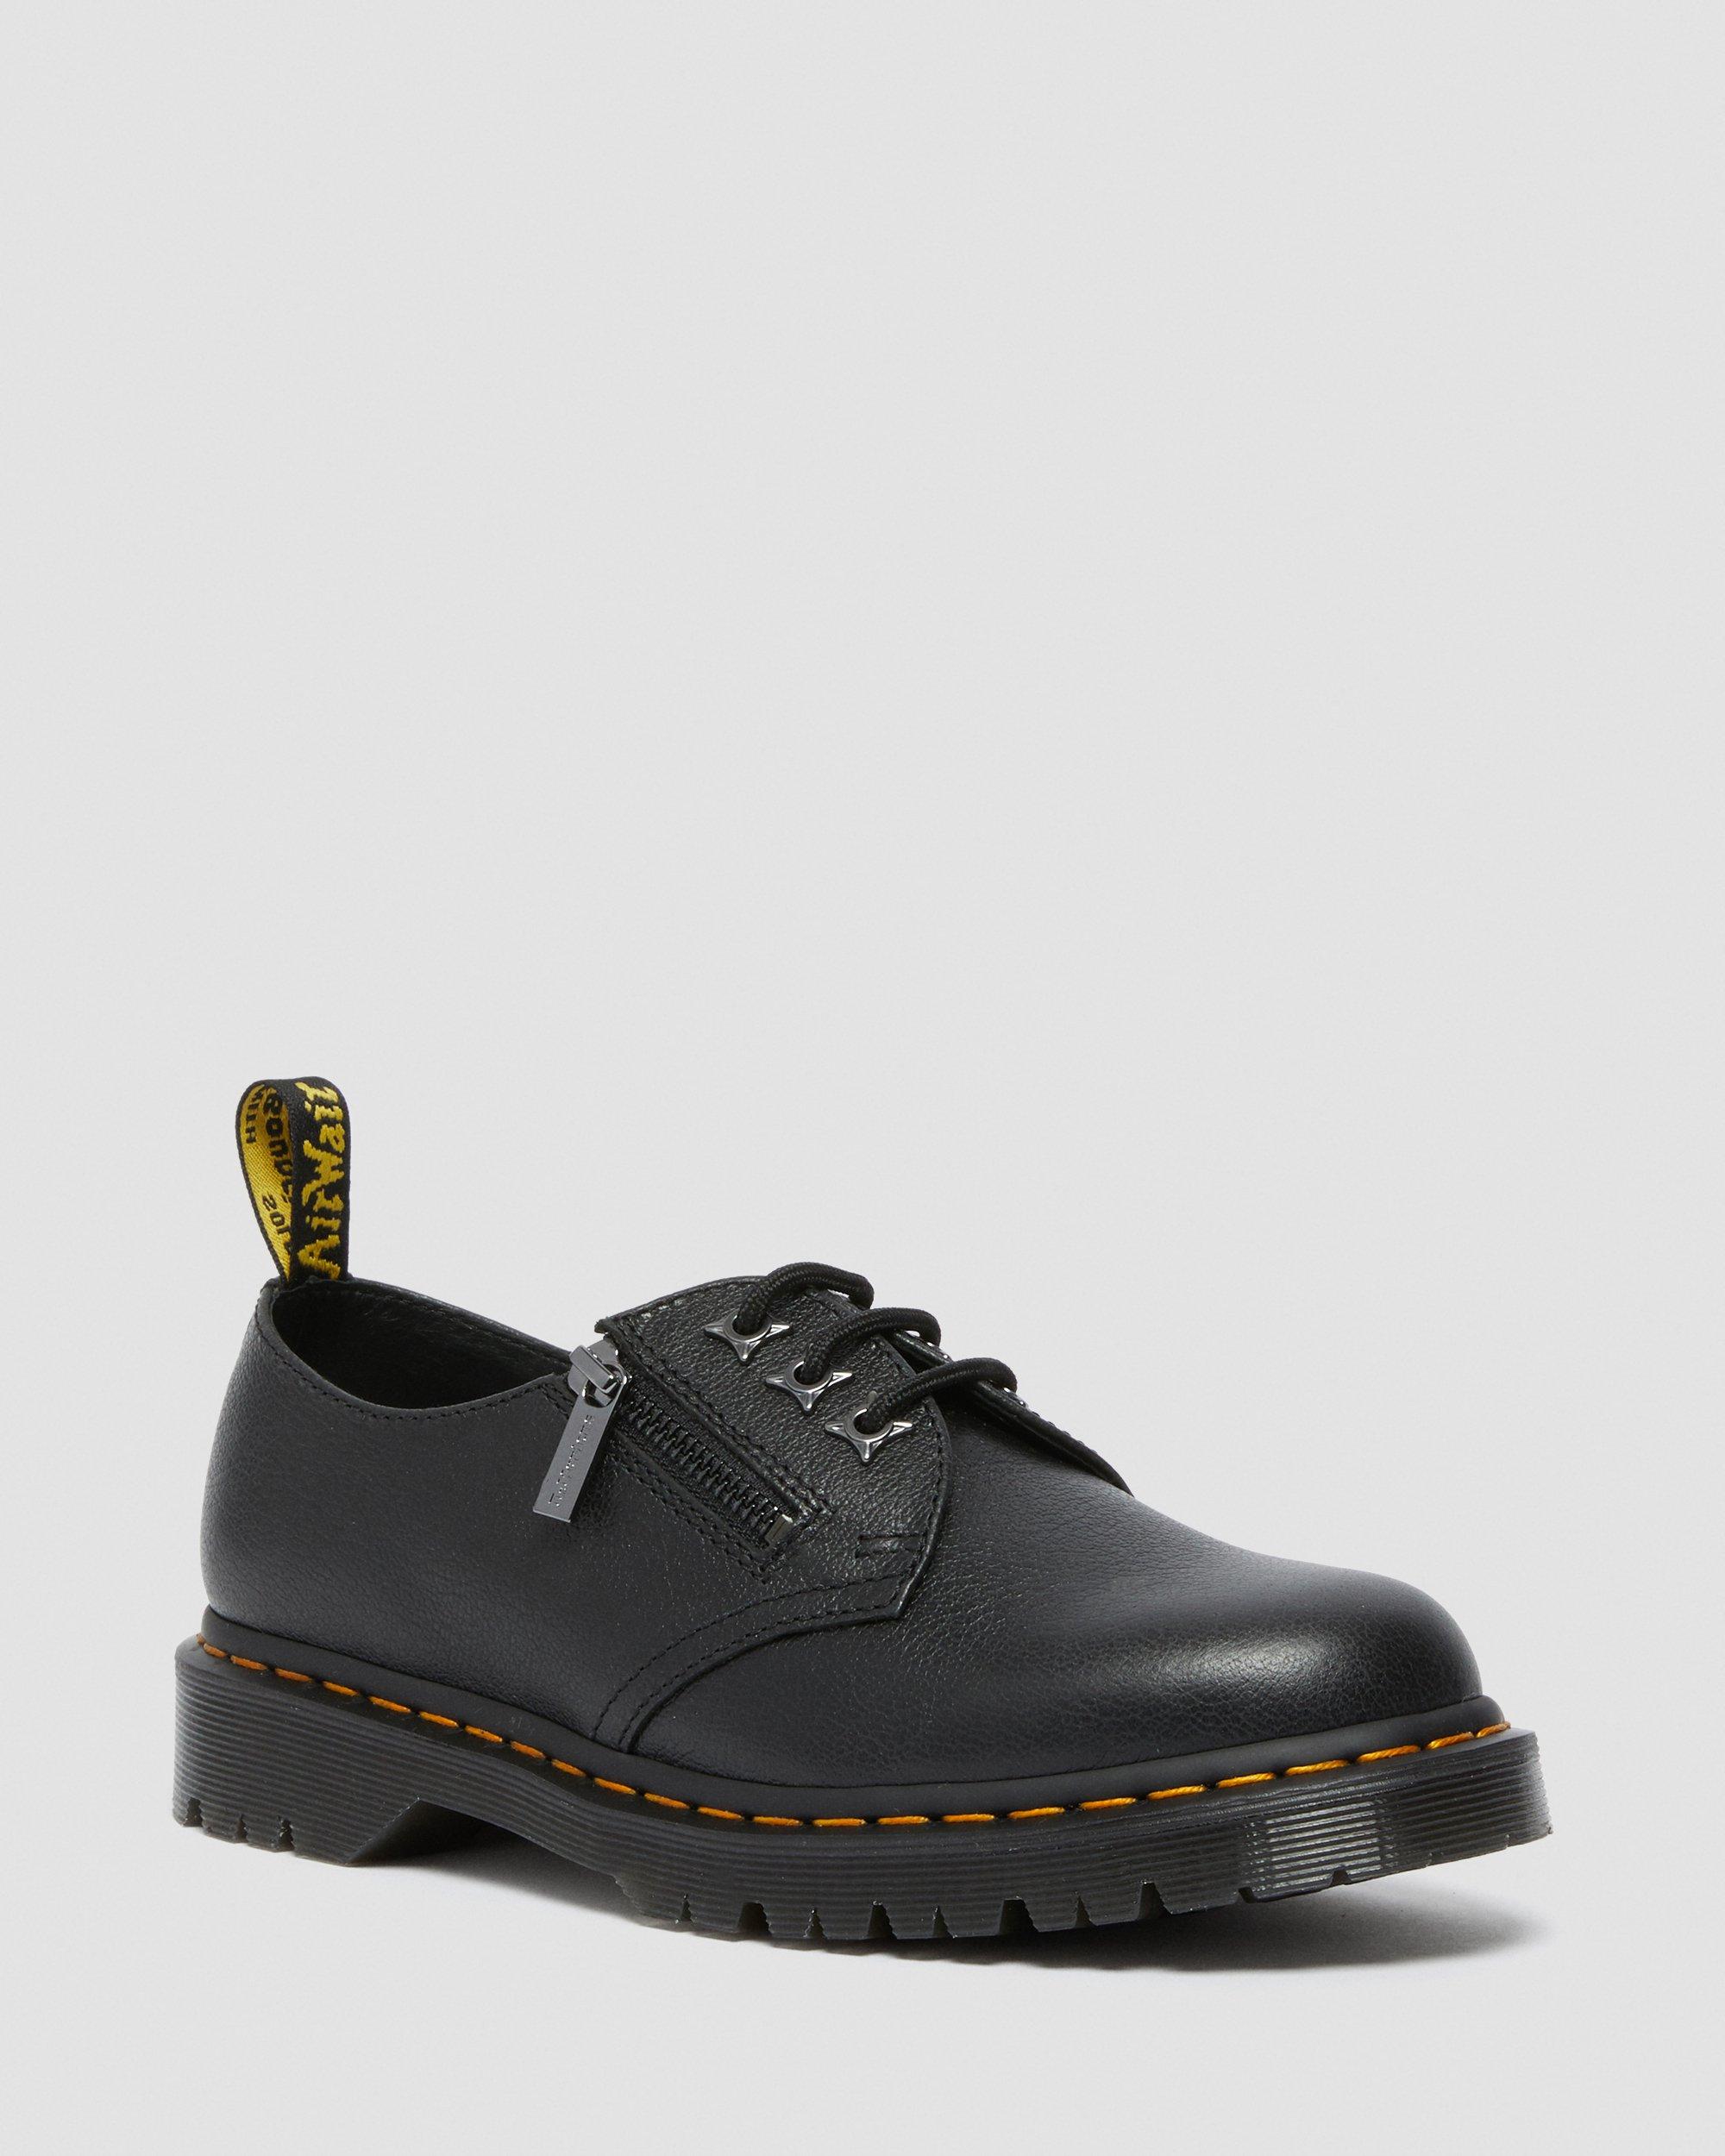 1461 Zip Tumbled Leather Oxford Shoes in Black | Dr. Martens